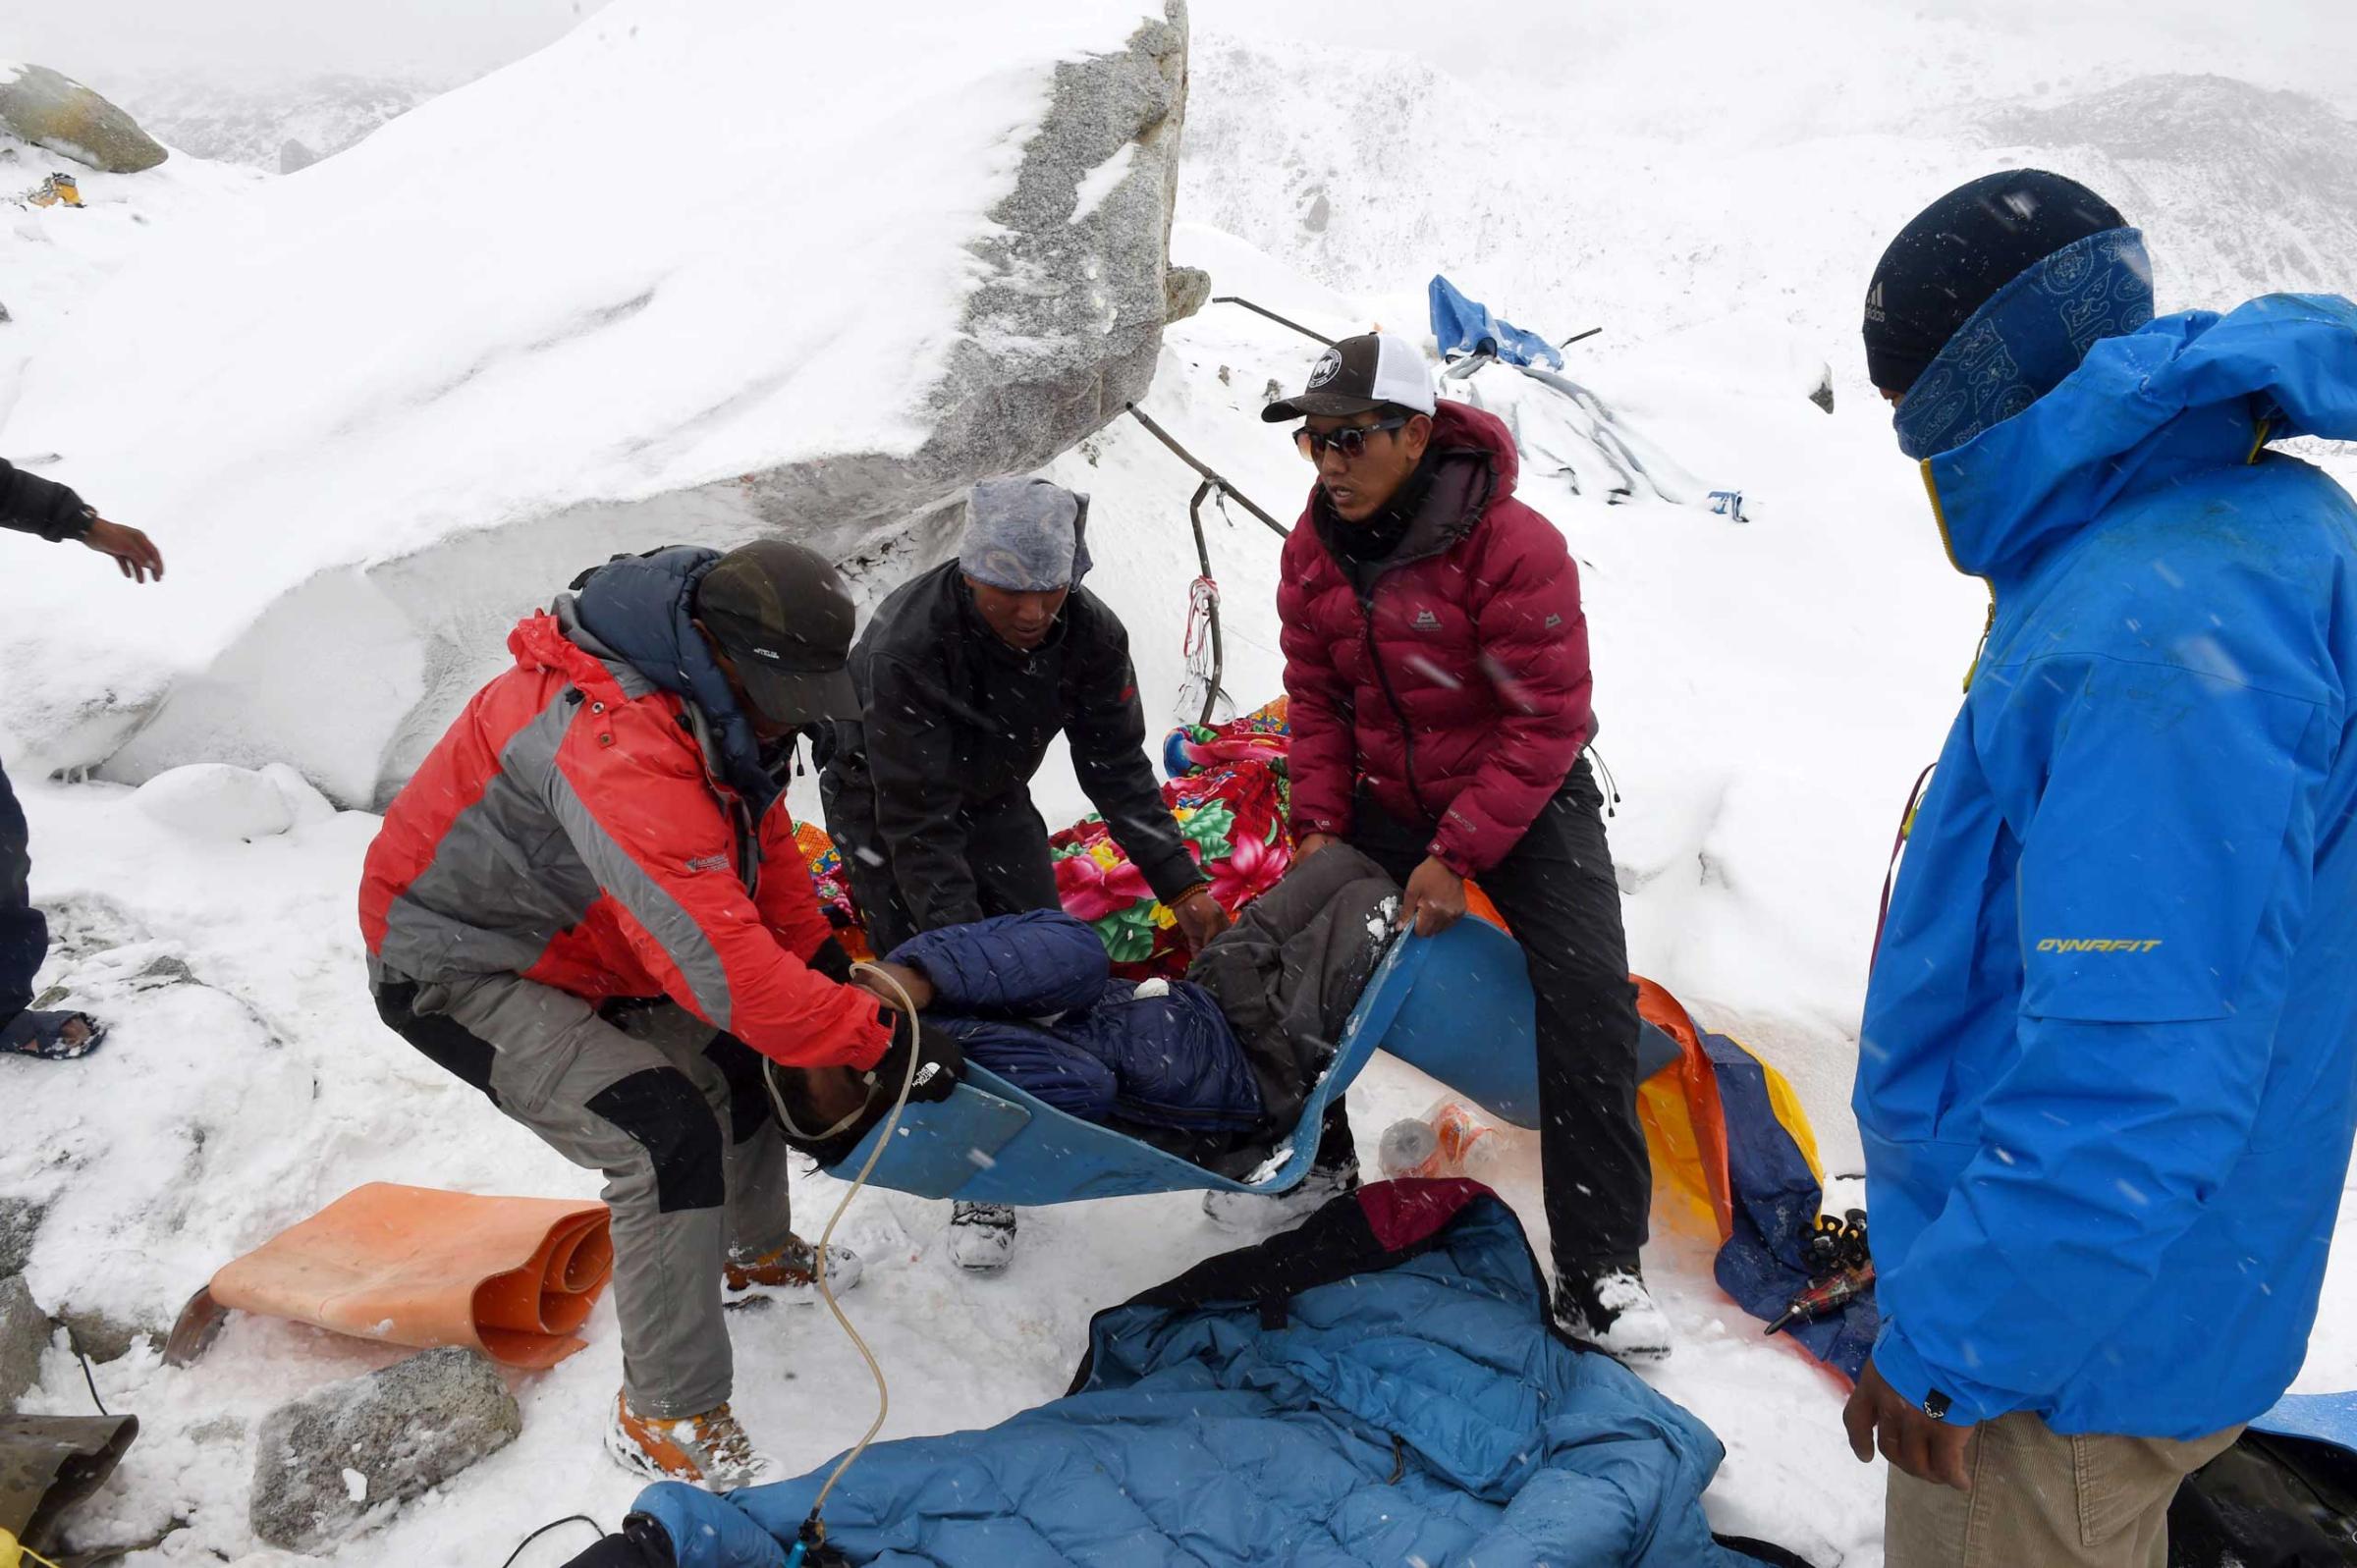 Rescuers help a porter onto a makeshift stretcher after he was injured by the avalanche on Mount Everest, triggered by an earthquake outside Kathmandu, Nepal.